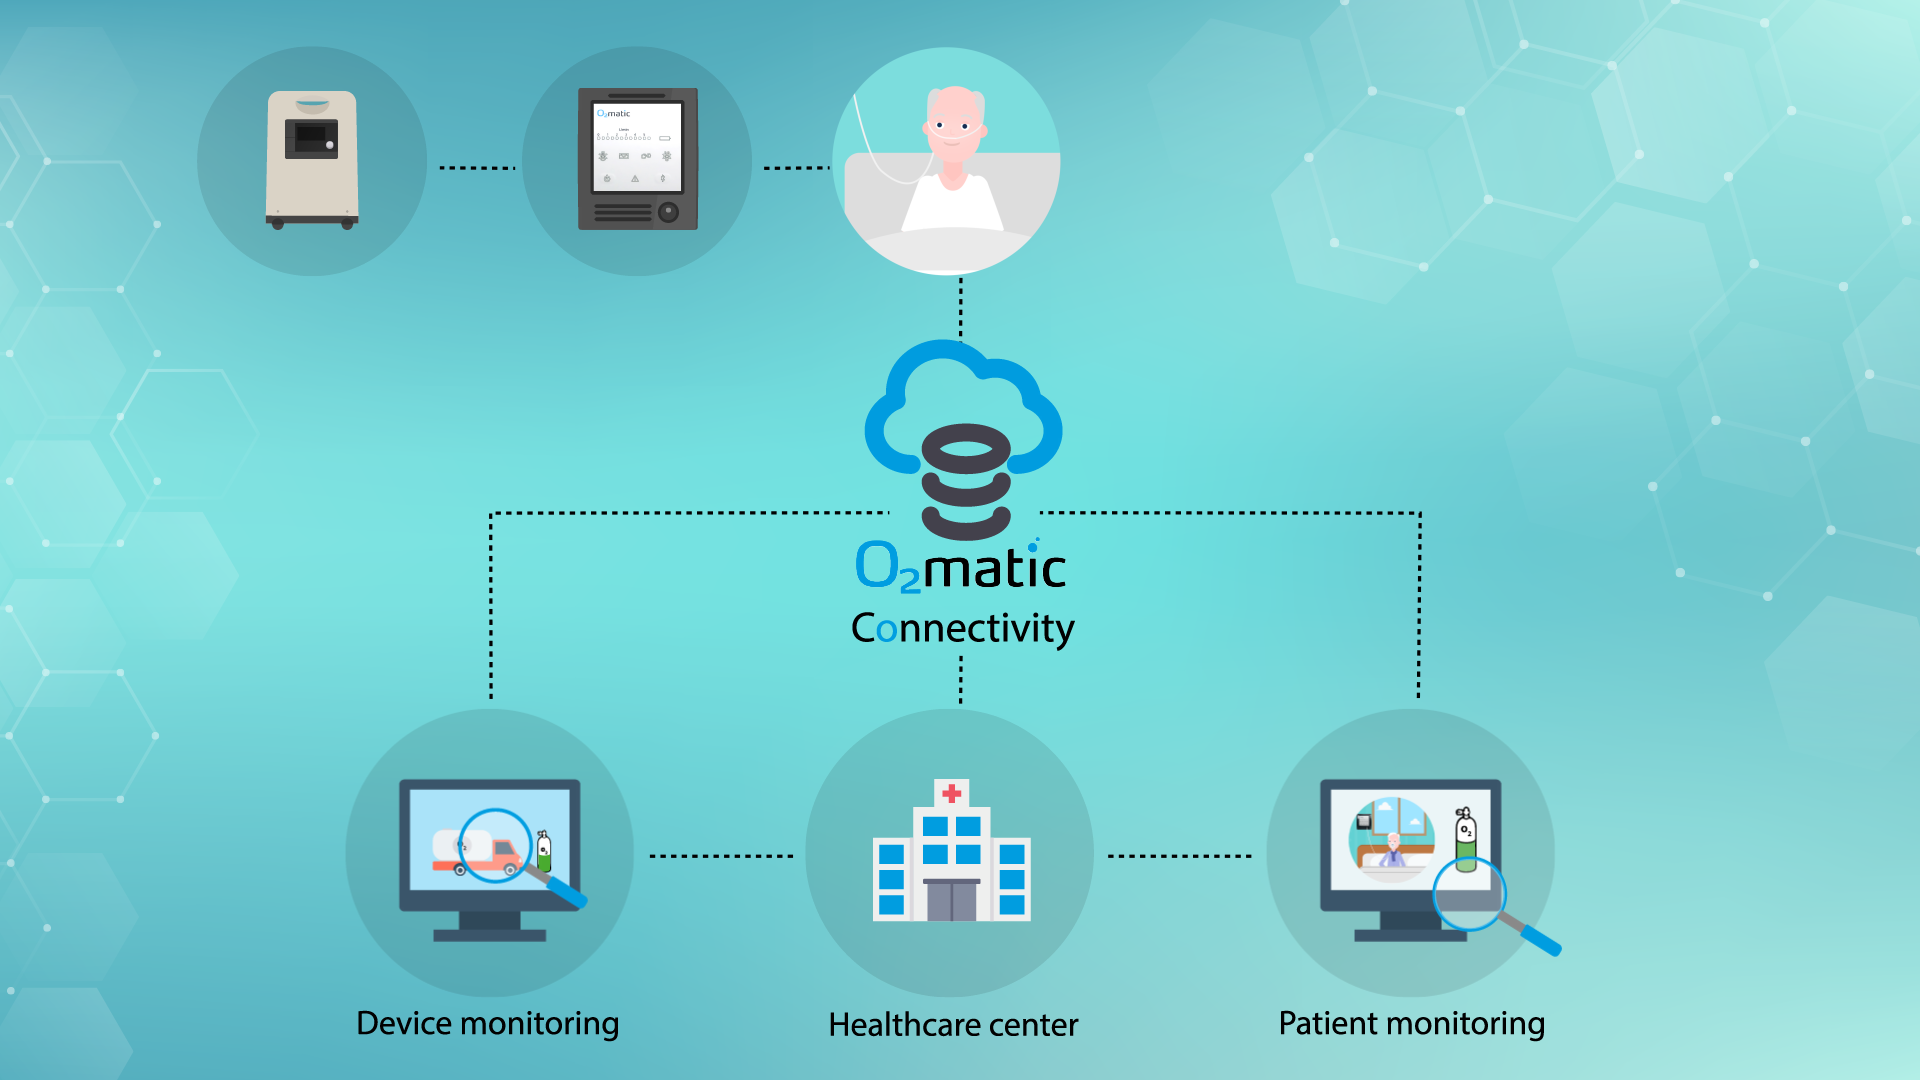 O2matic Connectivity - Home care mindmap